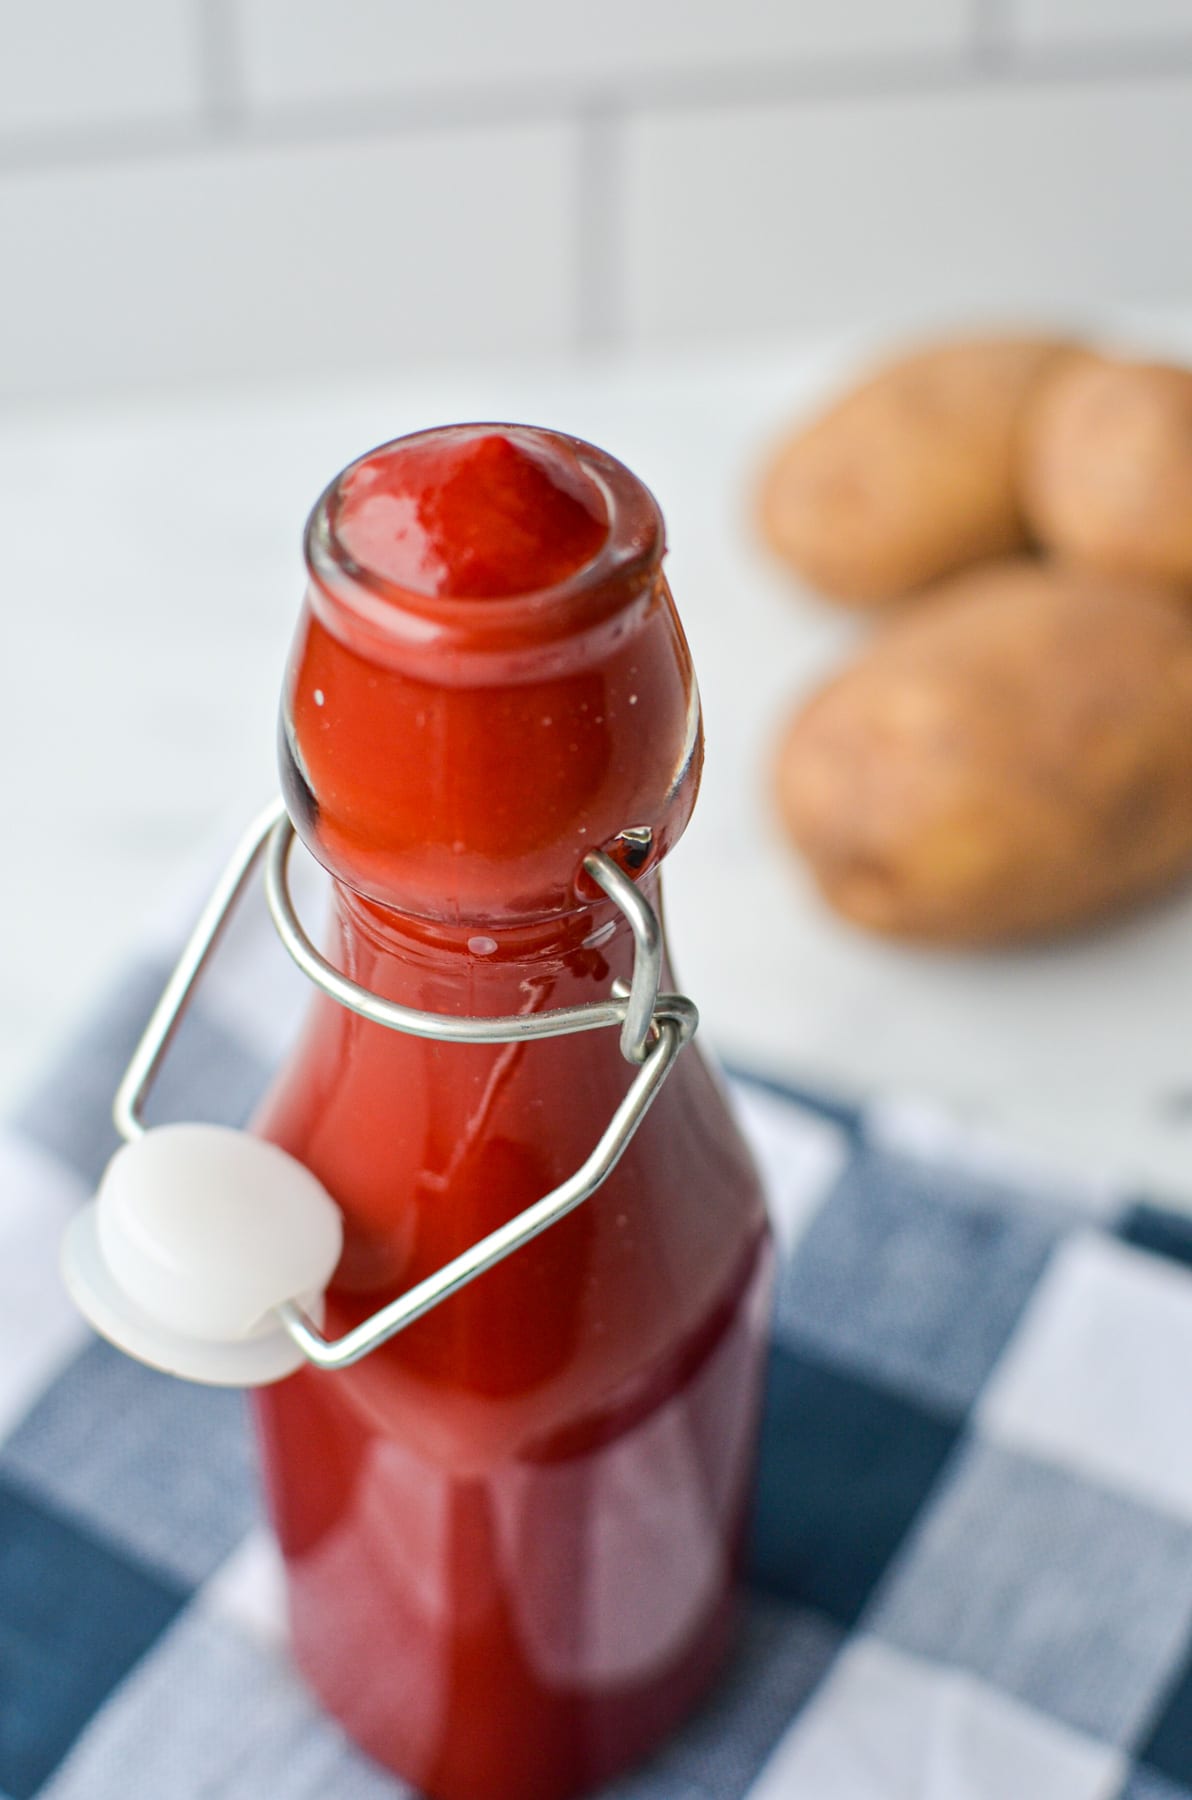 A close up of a bottle of homemade ketchup